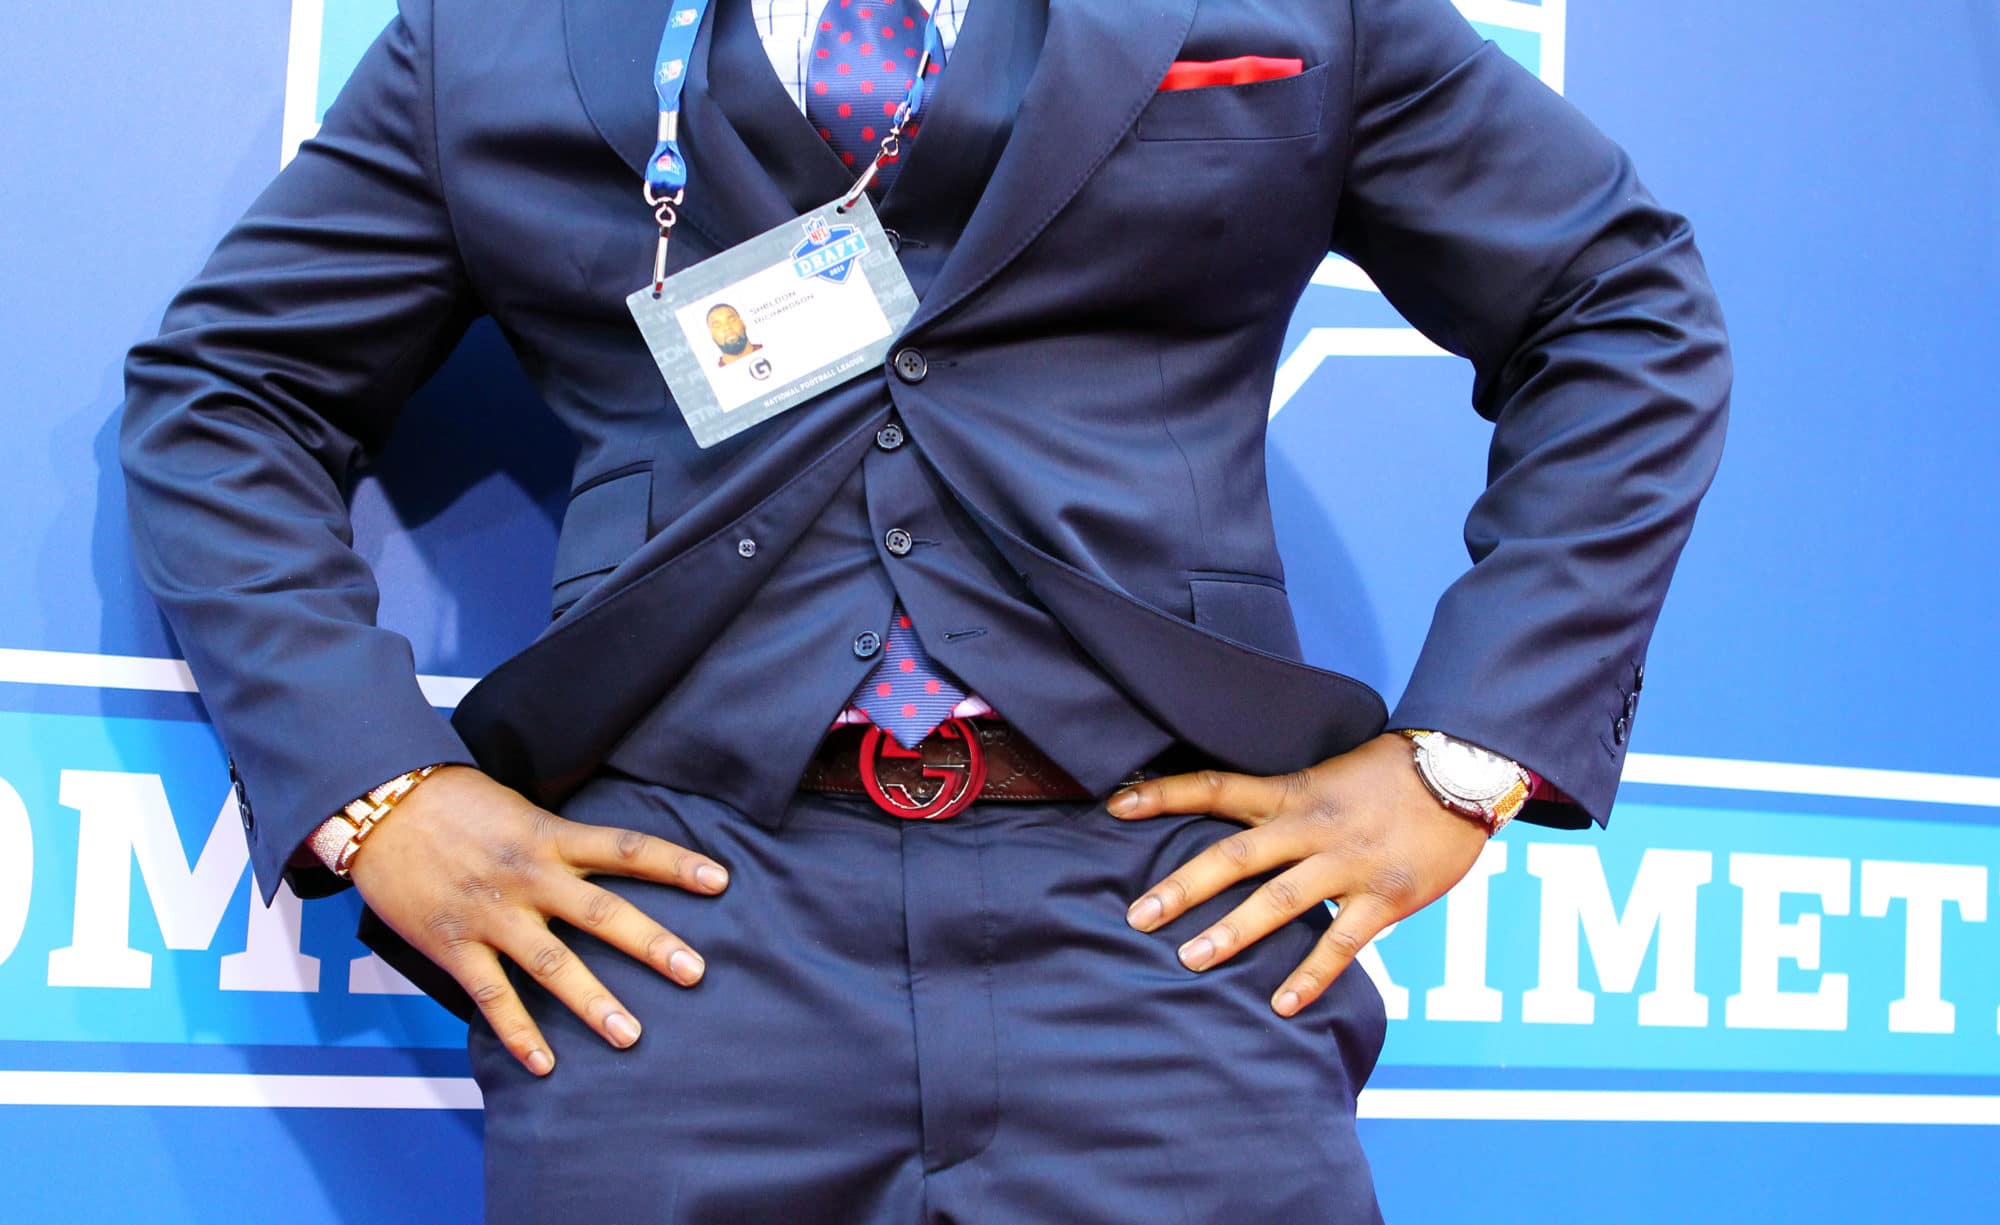 Style at the NFL draft means belts, vests, earrings, and lots of bling on the watch.